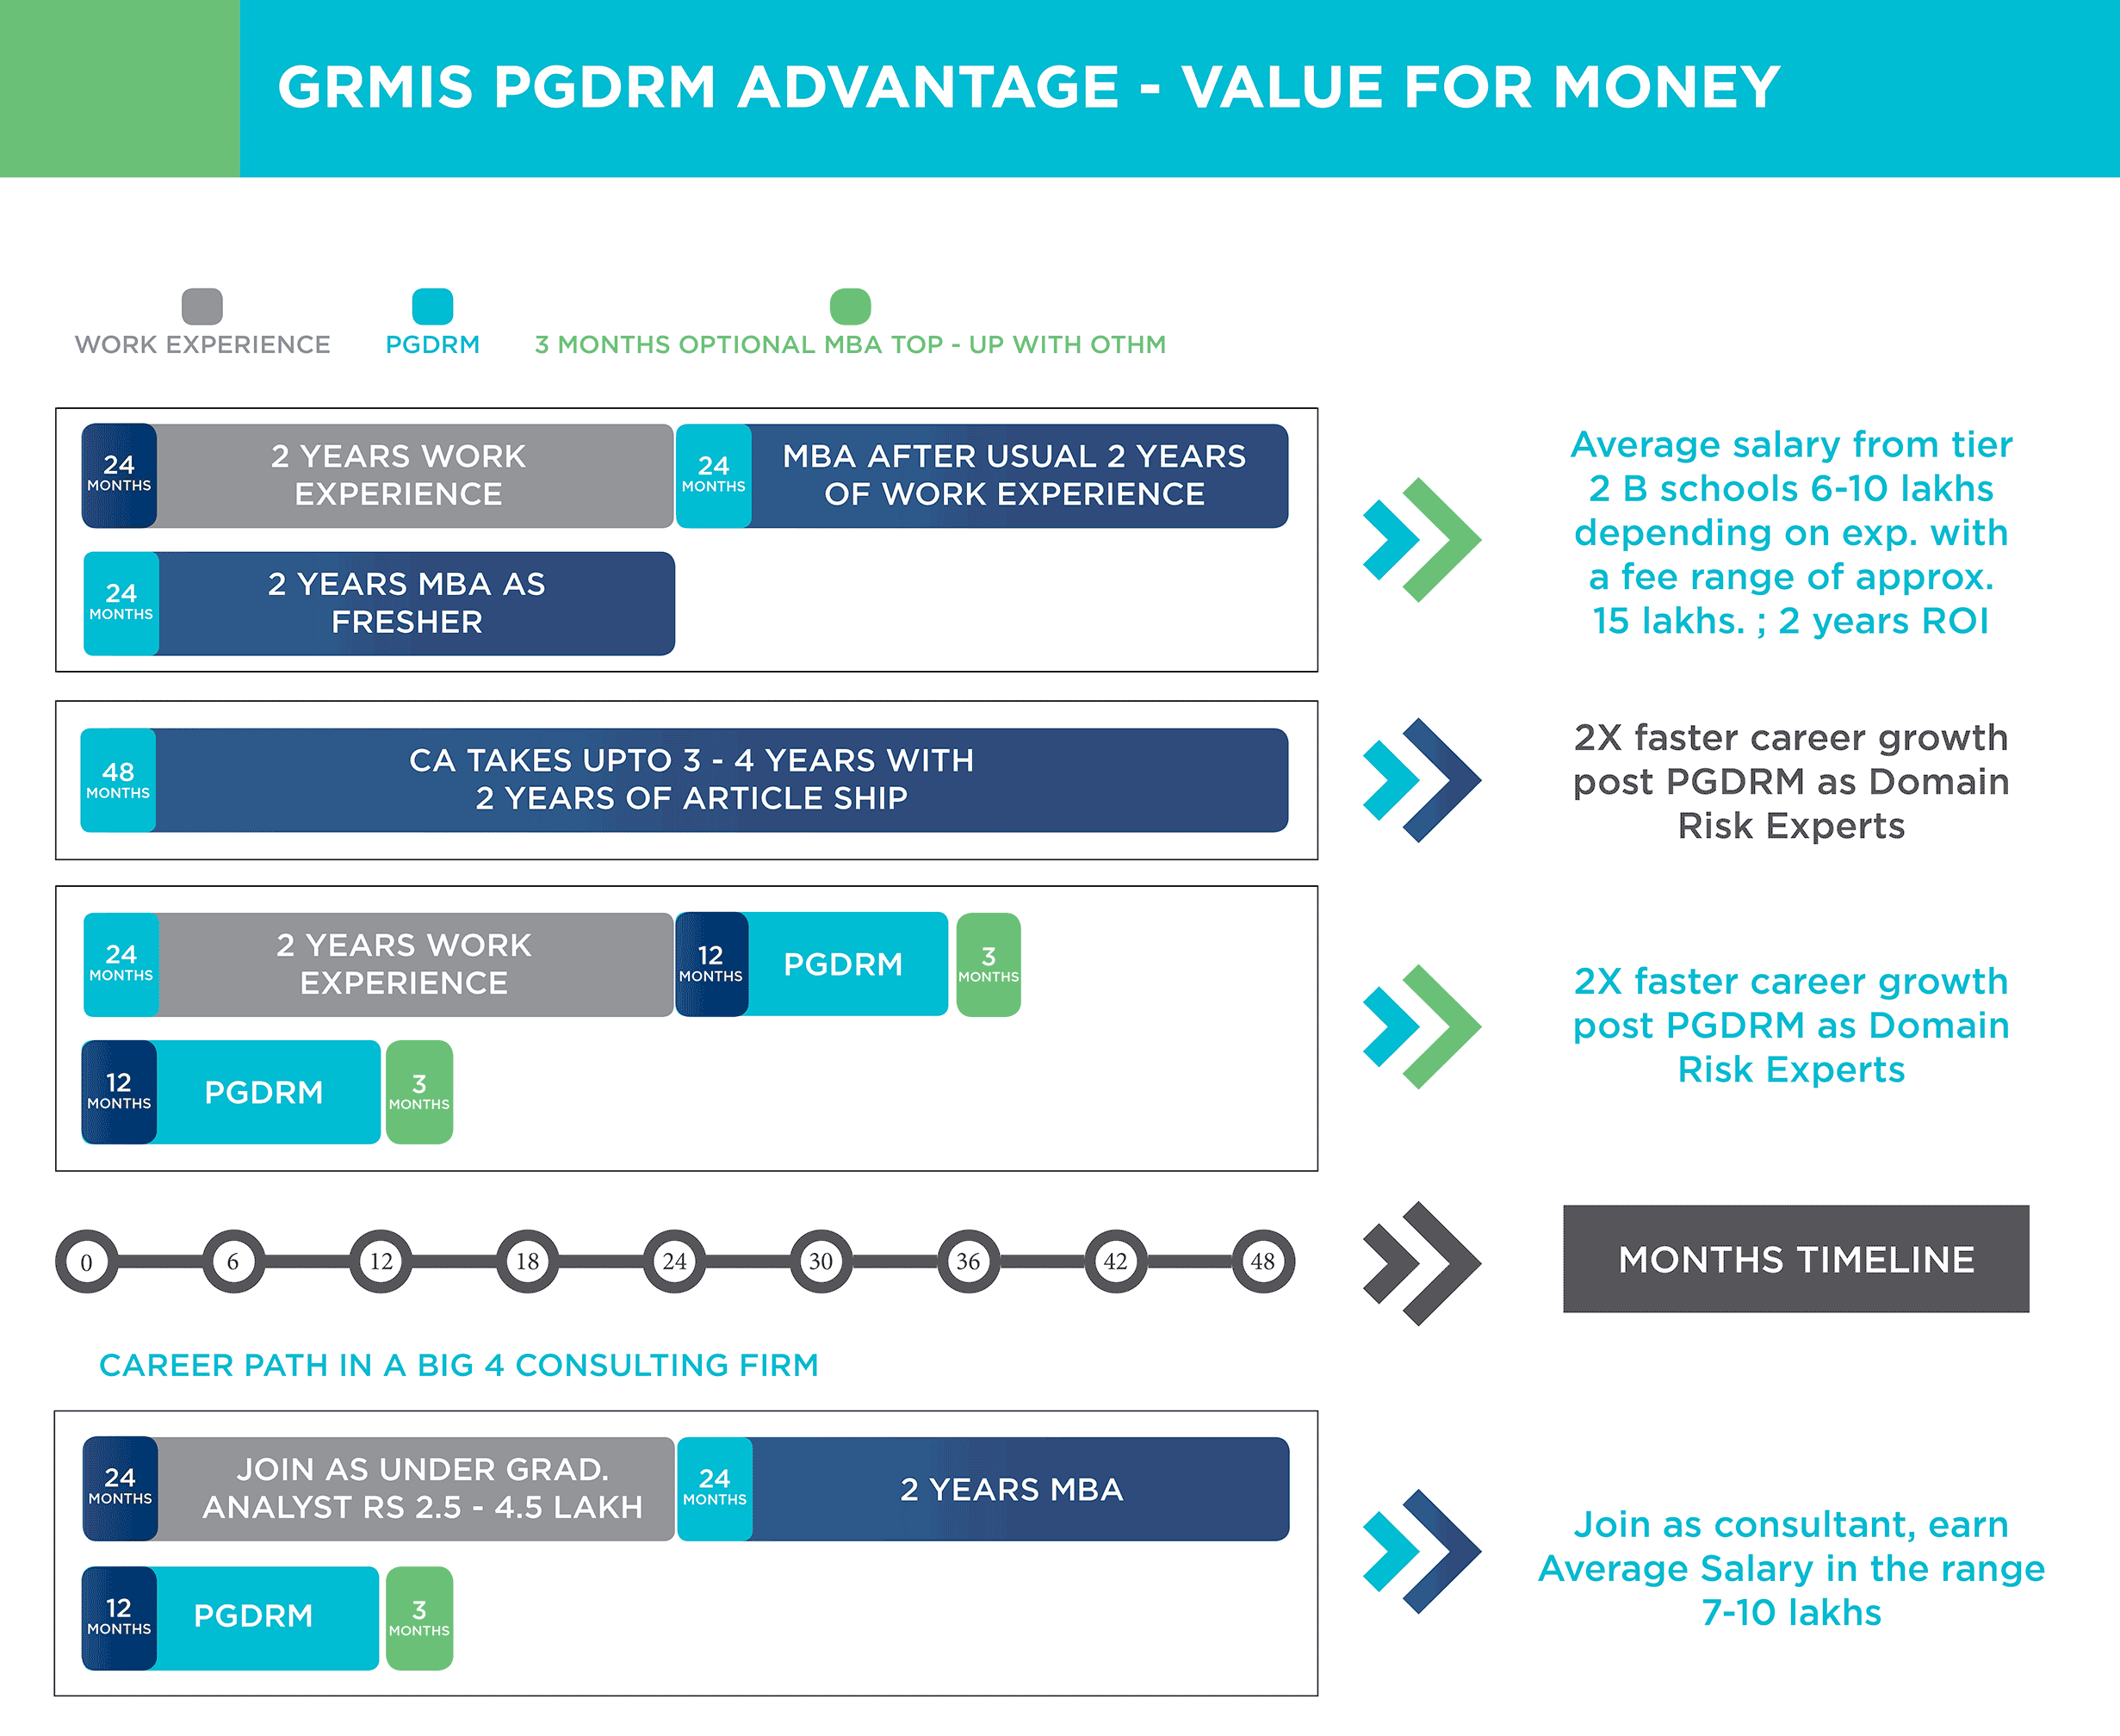 GRMI's PGDRM Advantages - Value for Money. Mini MBA or Alternative to MBA - PGDRM PG In Risk Management. It's cover financial Risk Management FRM also.